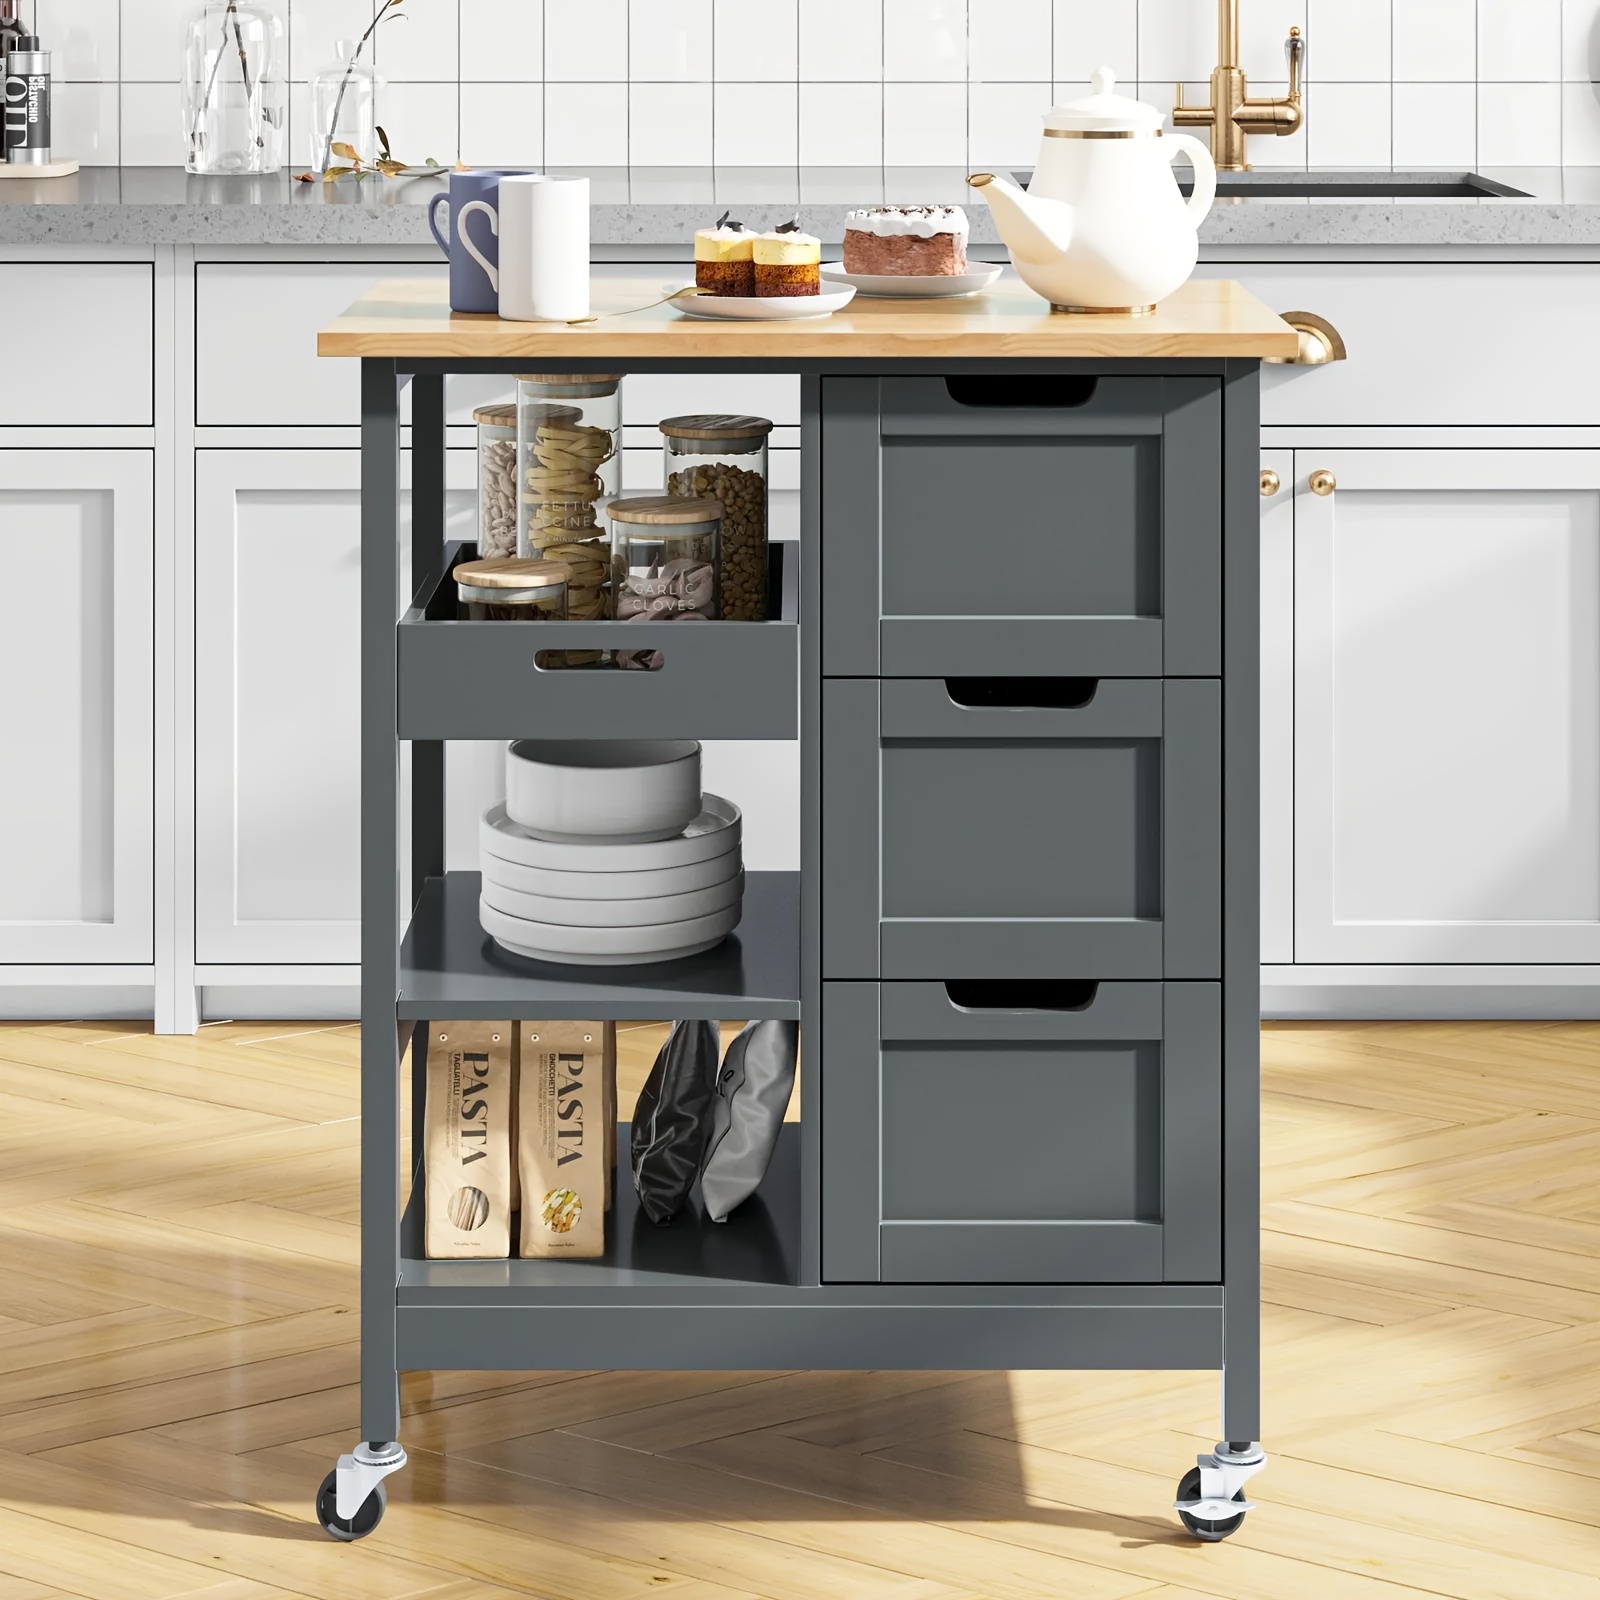 

Small Solid Wood Top Kitchen Island Cart On Wheels With Storage, Rolling Portable Dining Room Serving Utility Carts Mobile Movable With 3 Drawers Cabinet